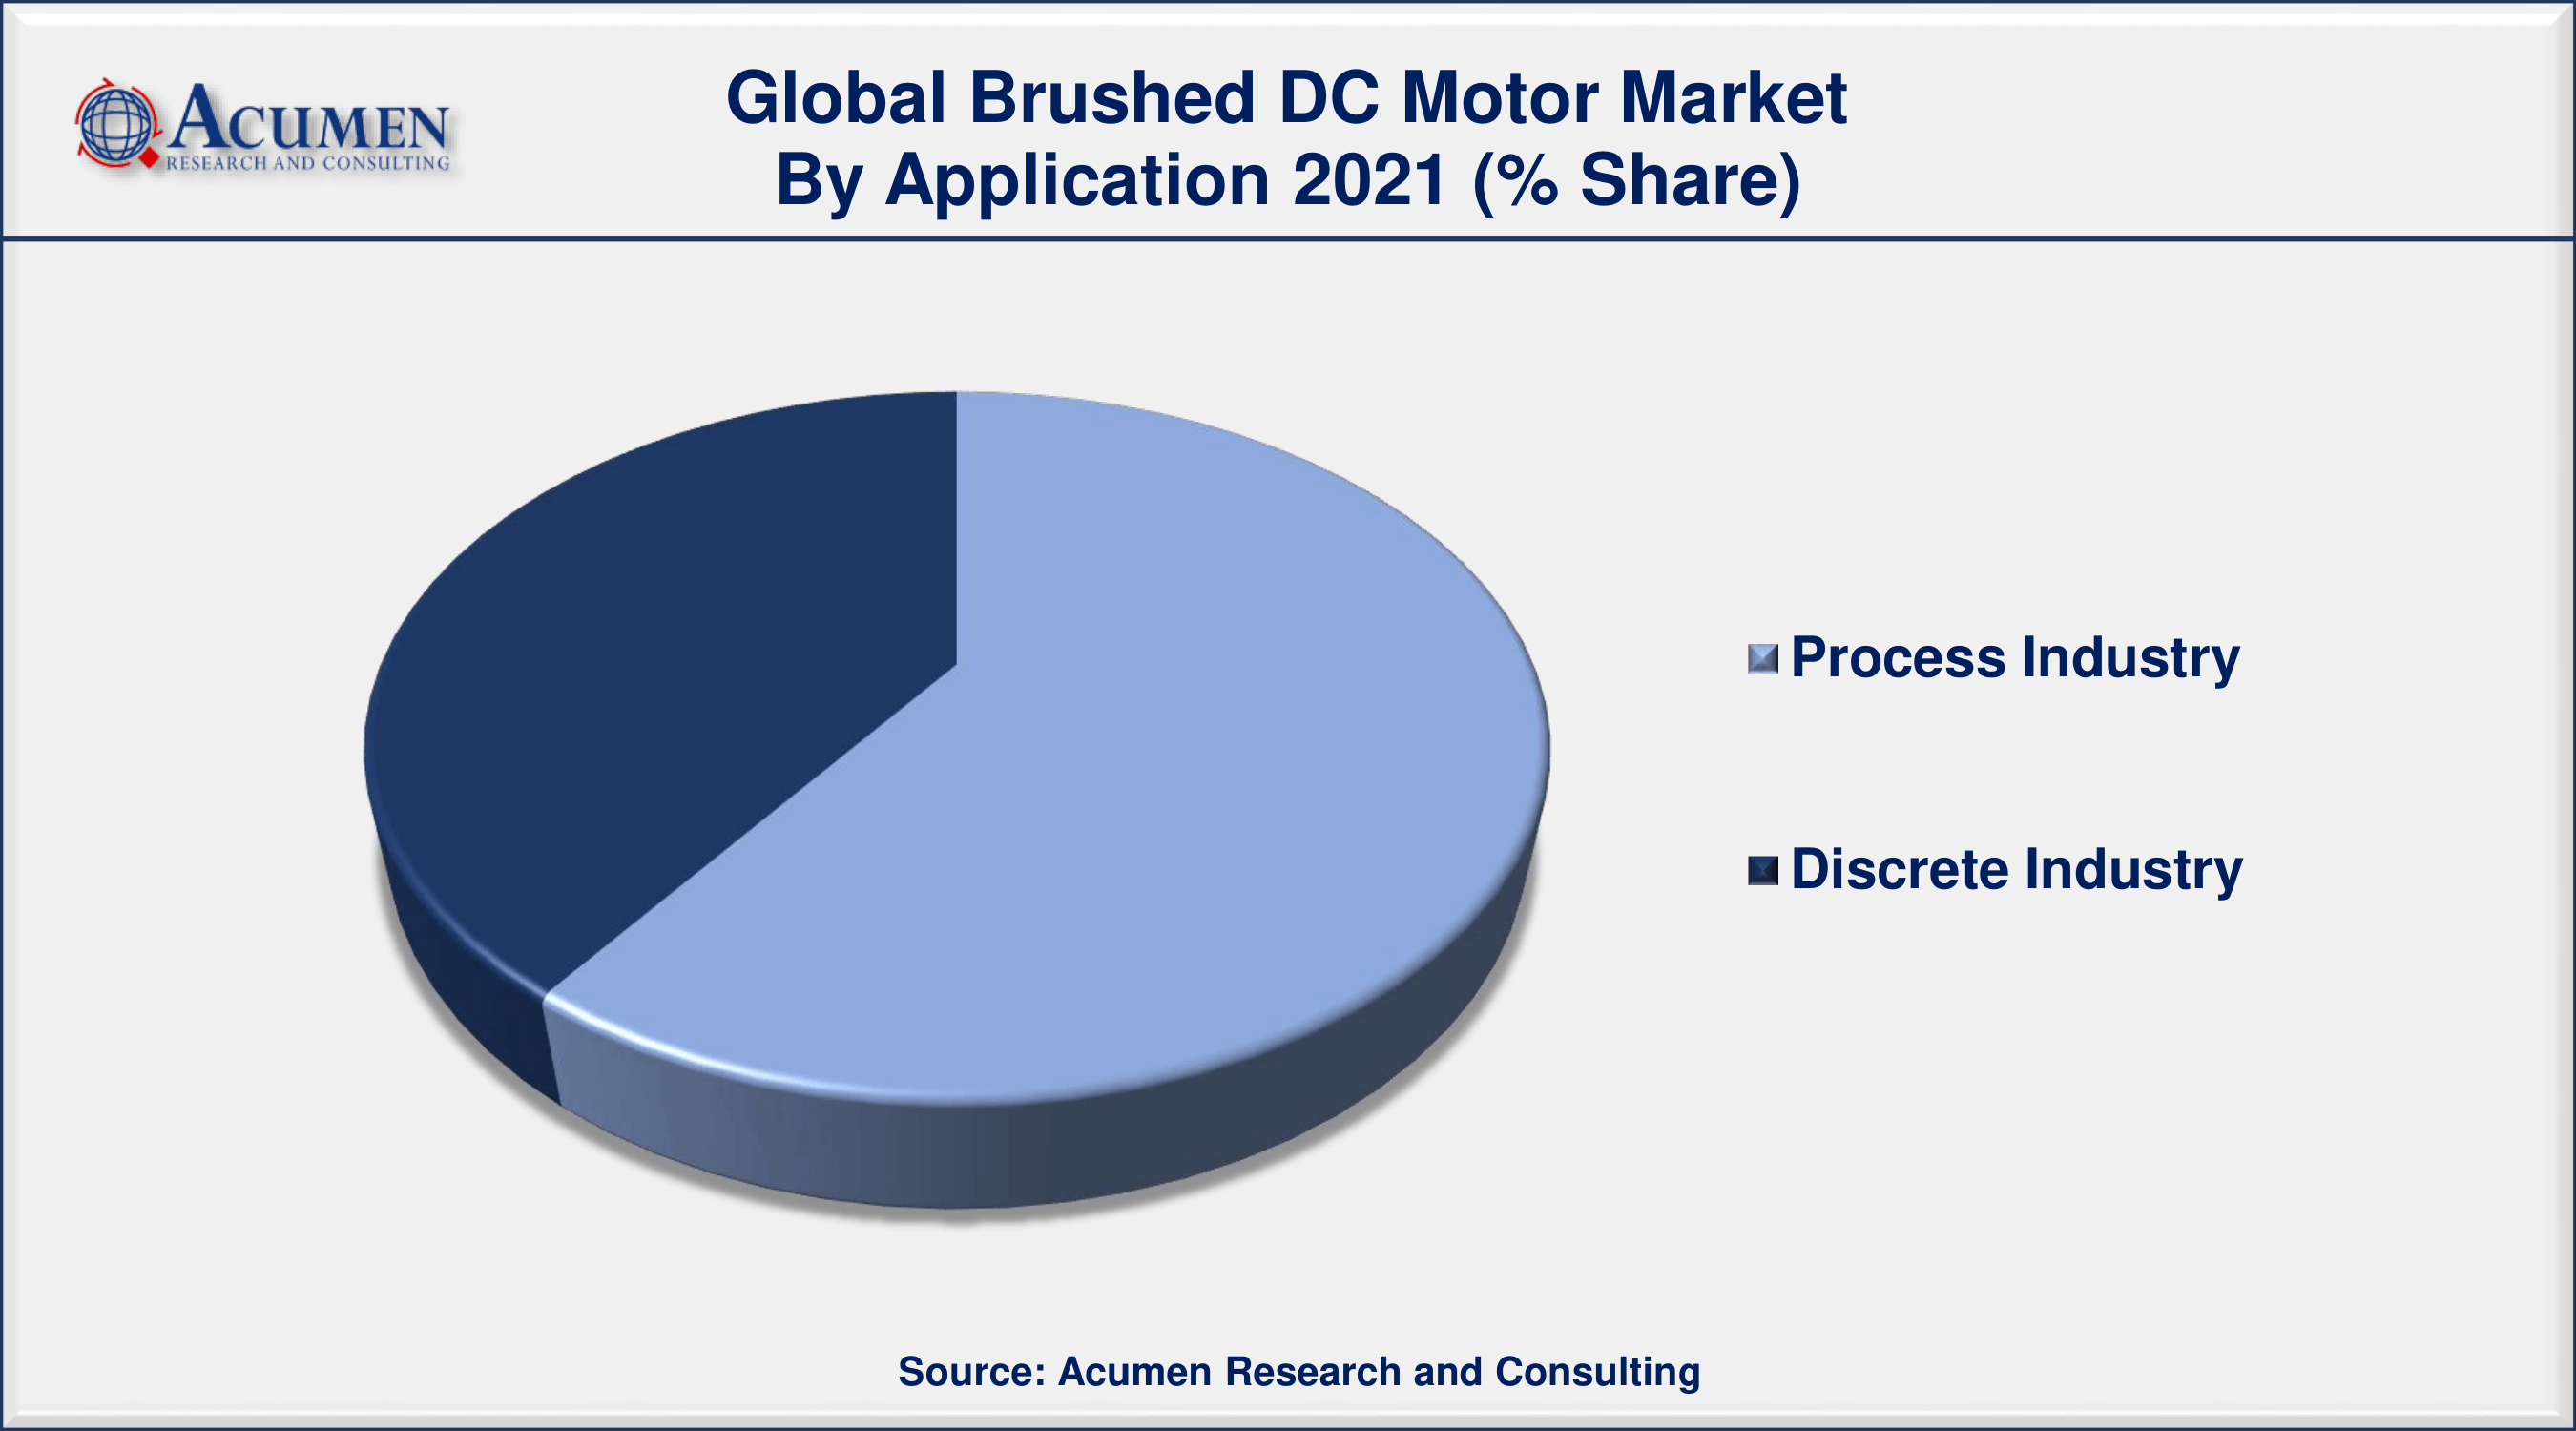 Among application, process industry sector engaged more than 60% of the total market share